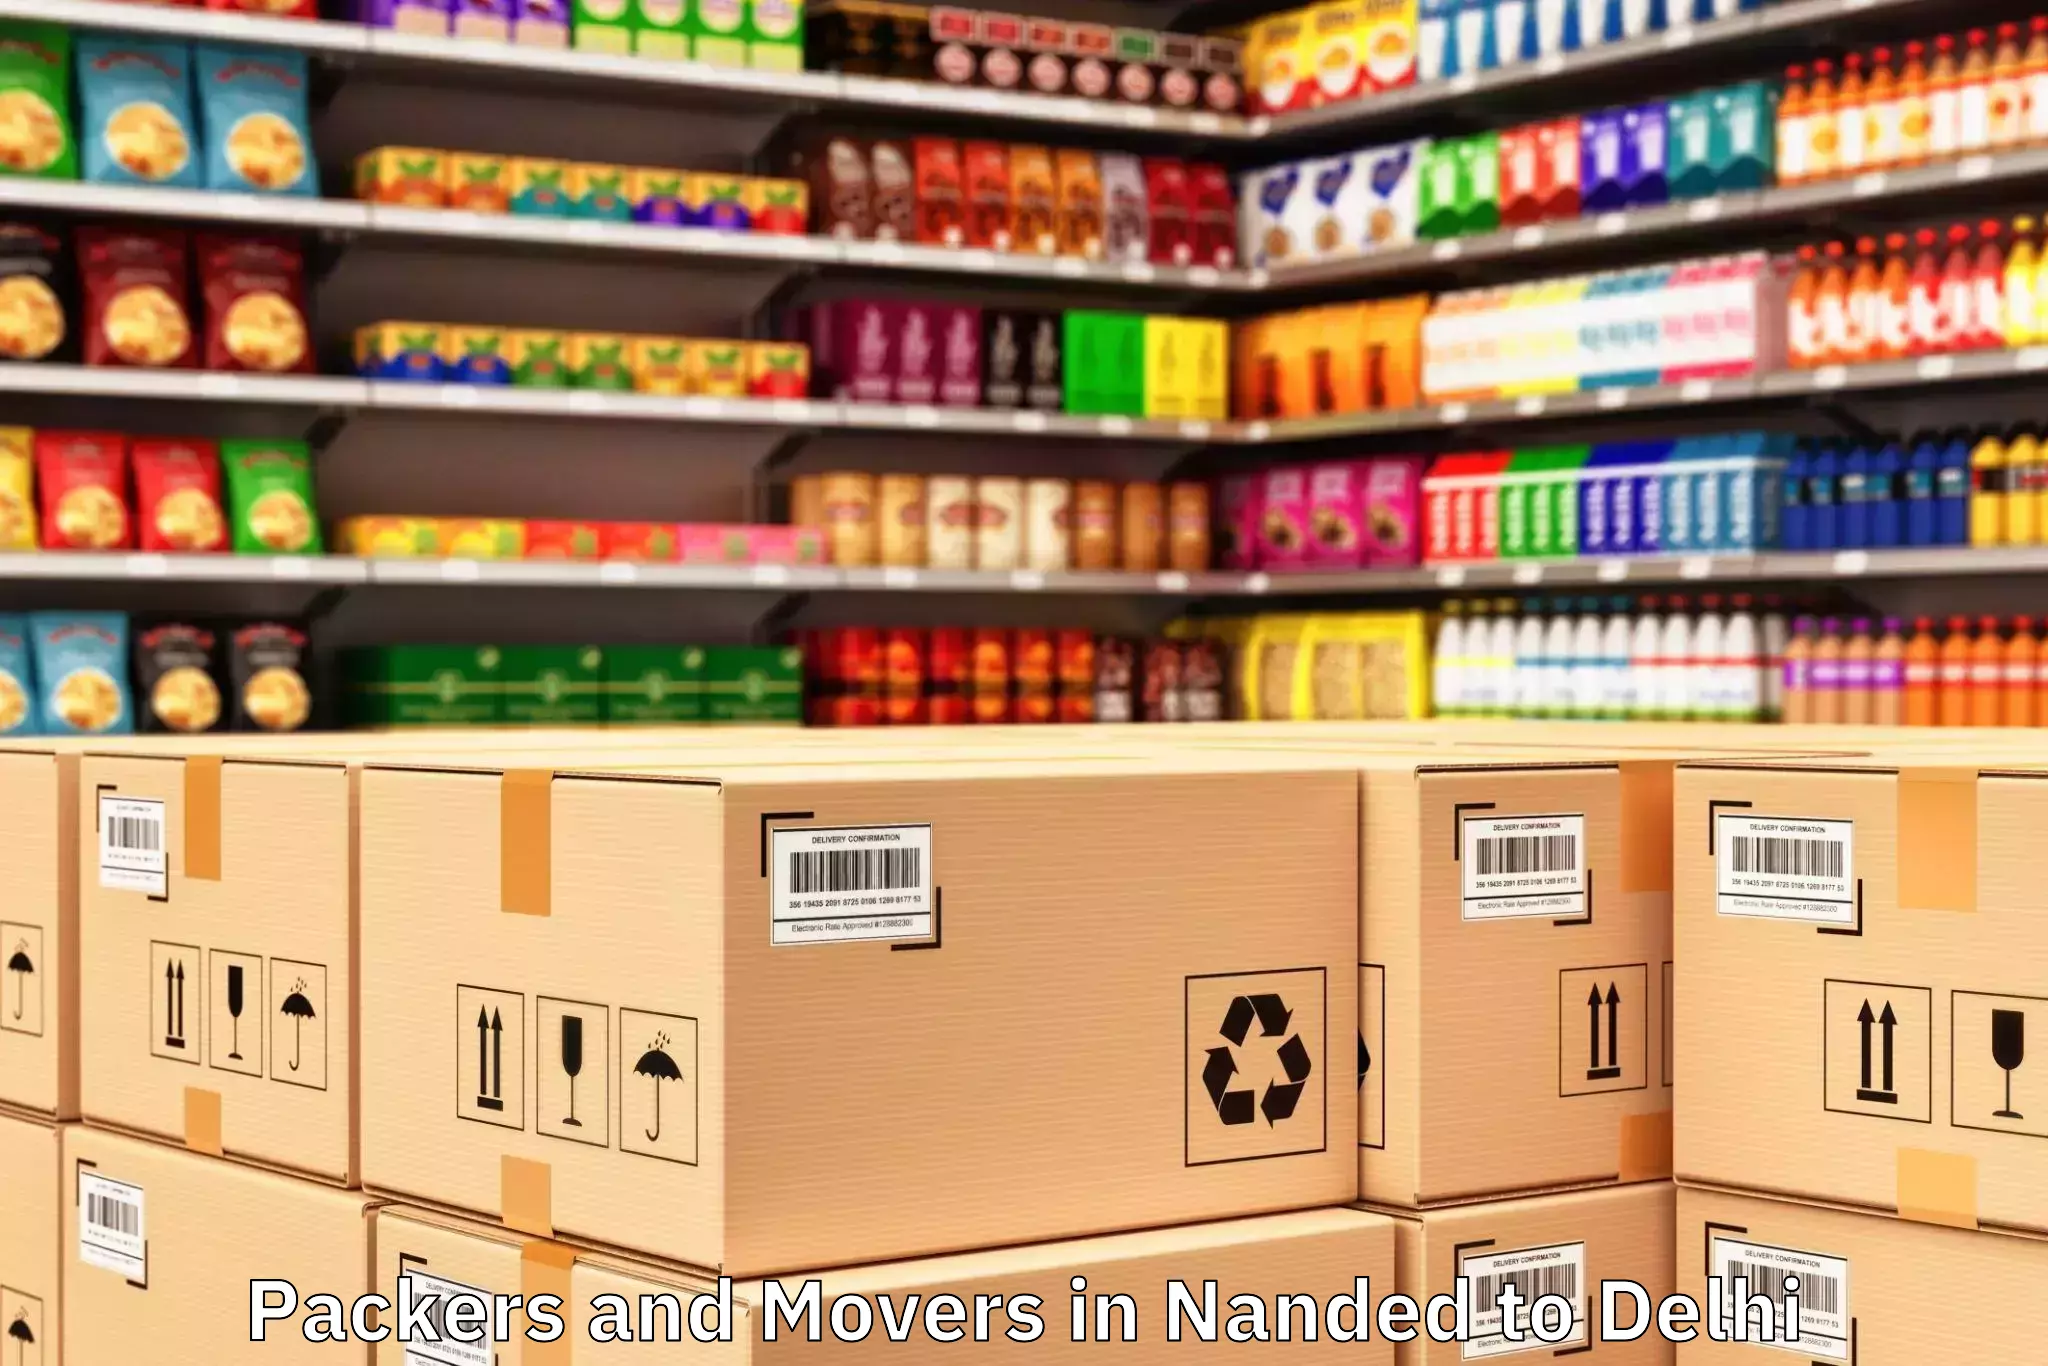 Professional Nanded to Pacific Mall Tagore Garden Packers And Movers